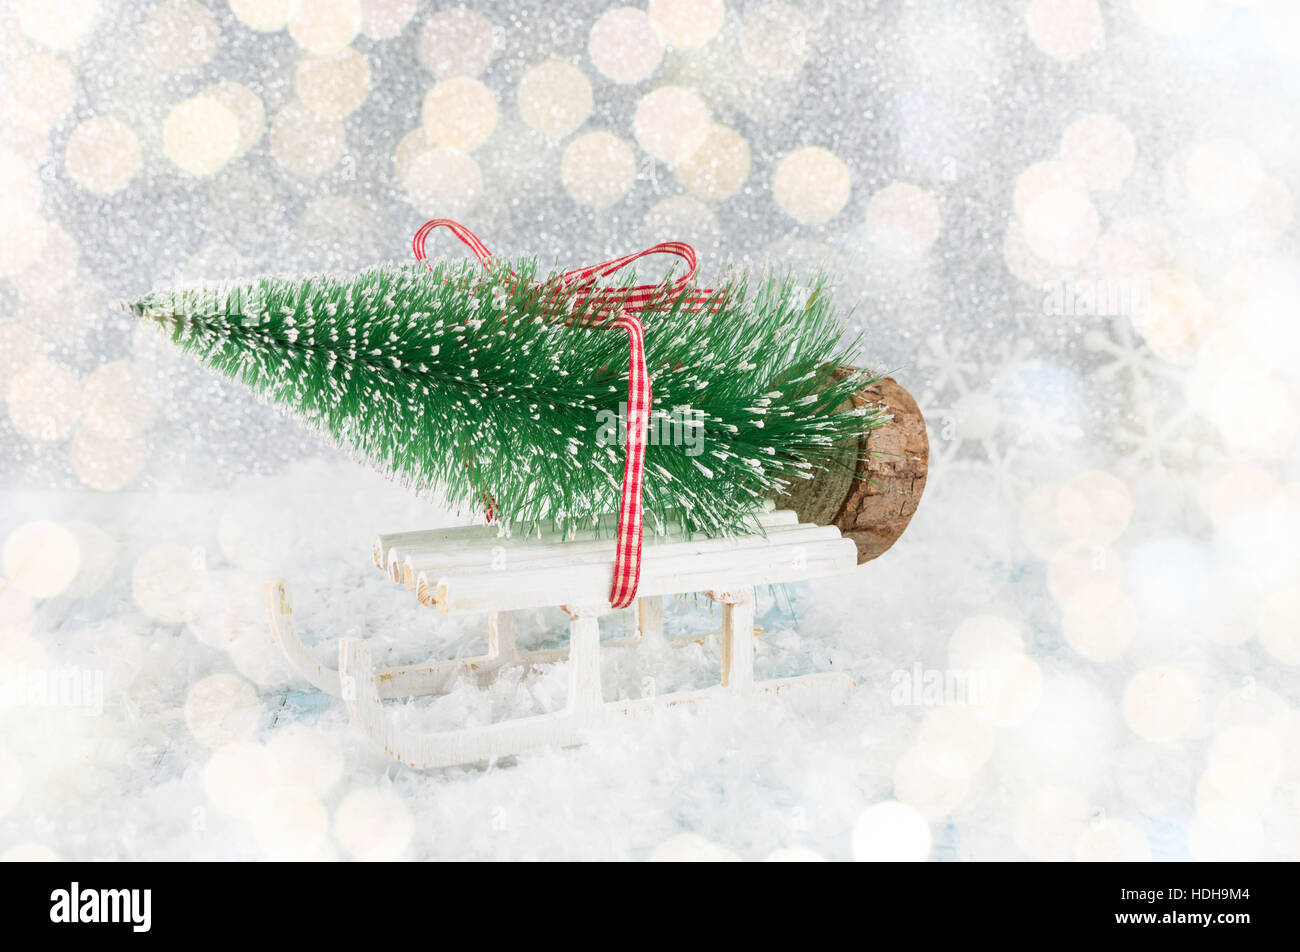 Small sleigh carrying a Christmas tree miniature Stock Photo